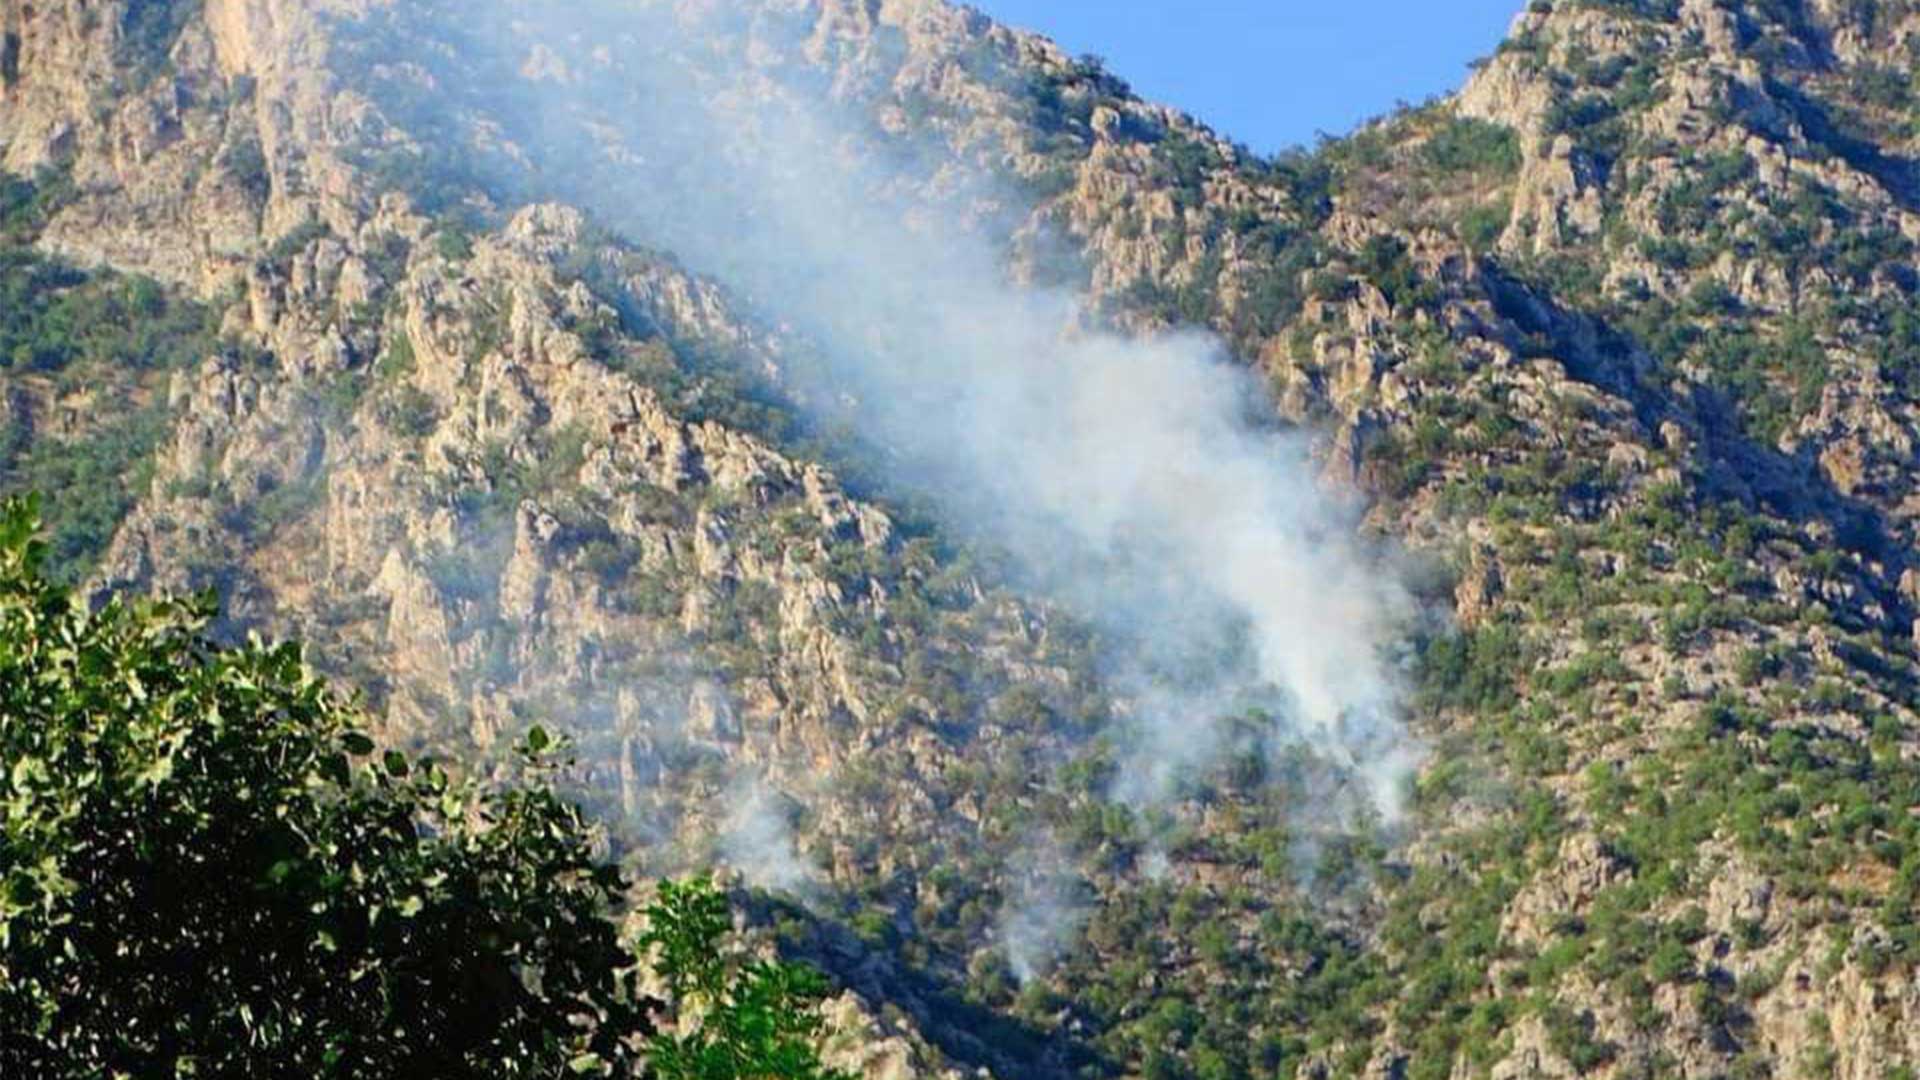  Fire in one of the mountains in Duhok.